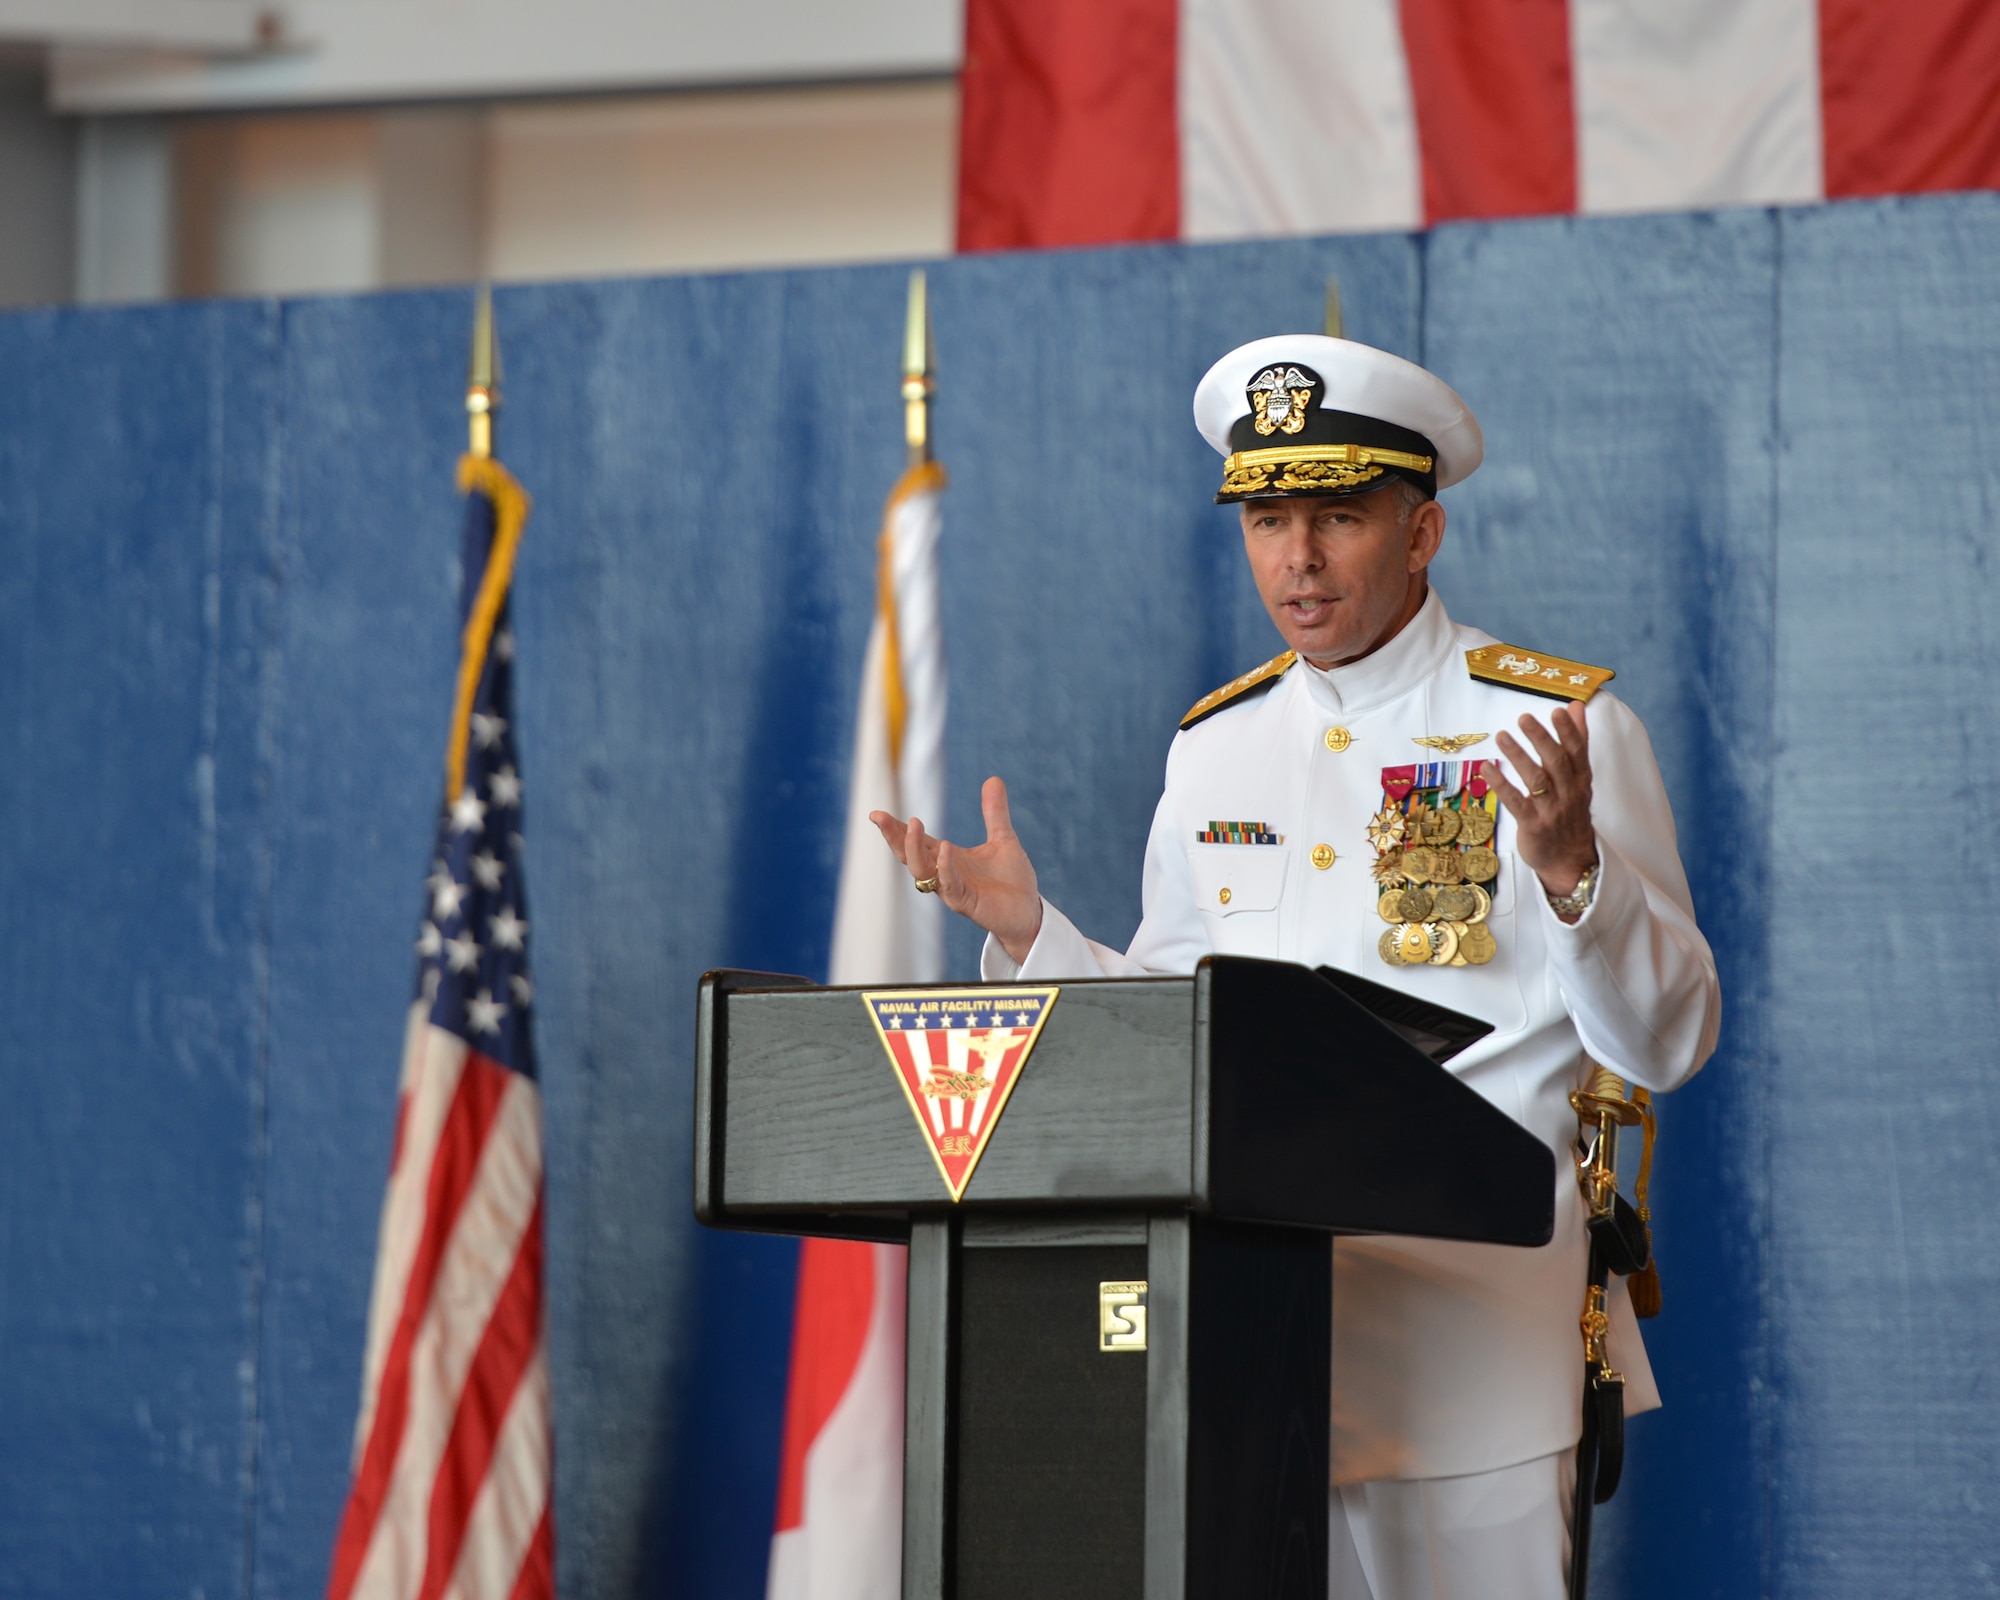 Rear Adm. Terry Kraft, U.S. Naval Forces Japan commander, serves as guest speaker during the Naval Air Facility (NAF) Misawa Change of Command Ceremony, June 20, 2014. During the ceremony, Capt. Keith Henry assumed command of NAF Misawa from Capt. Chris Rodeman. NAF Misawa is a U.S. naval installation located in northern Japan. (U.S. Navy photo by Mass Communication Specialist 3rd Class Erin Devenberg/Released)